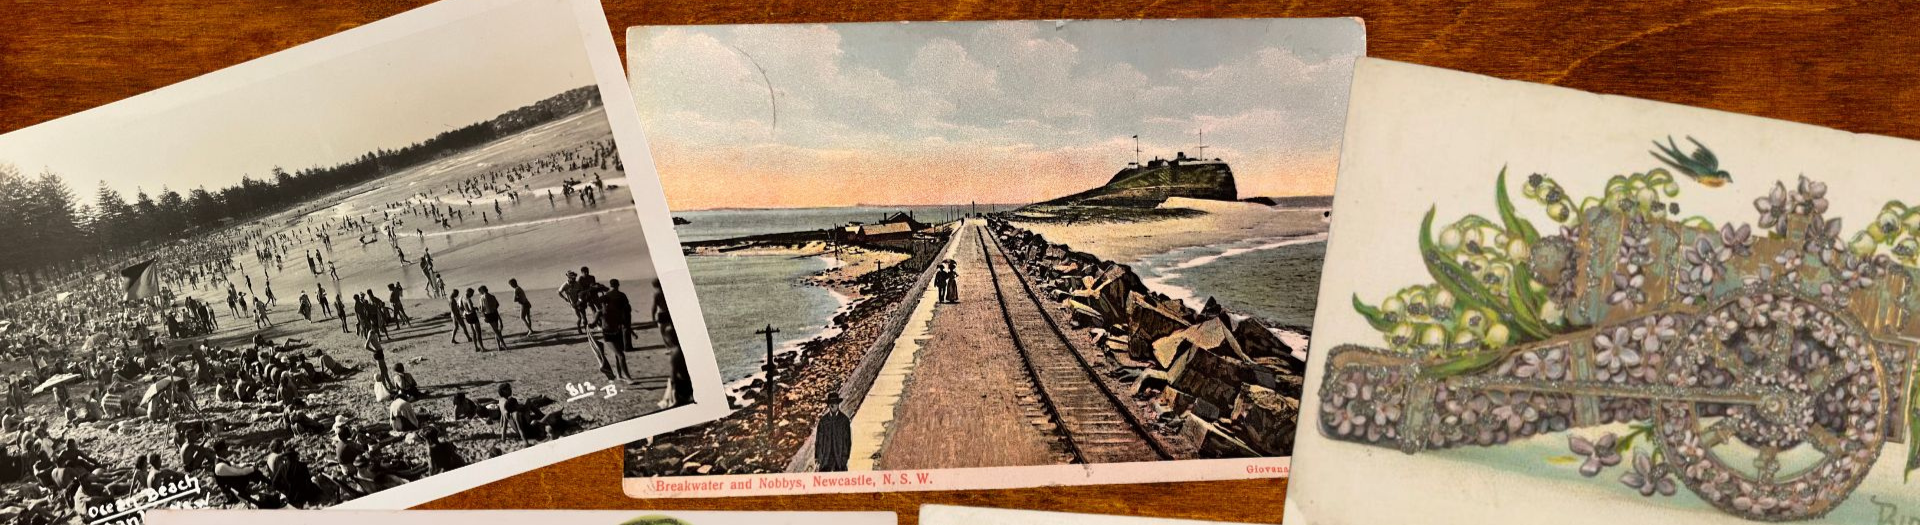 Three old postcards on a wooden surface. From right to left, they show a crowded beach, a couple walking along a pier and a cannon covered in flowers